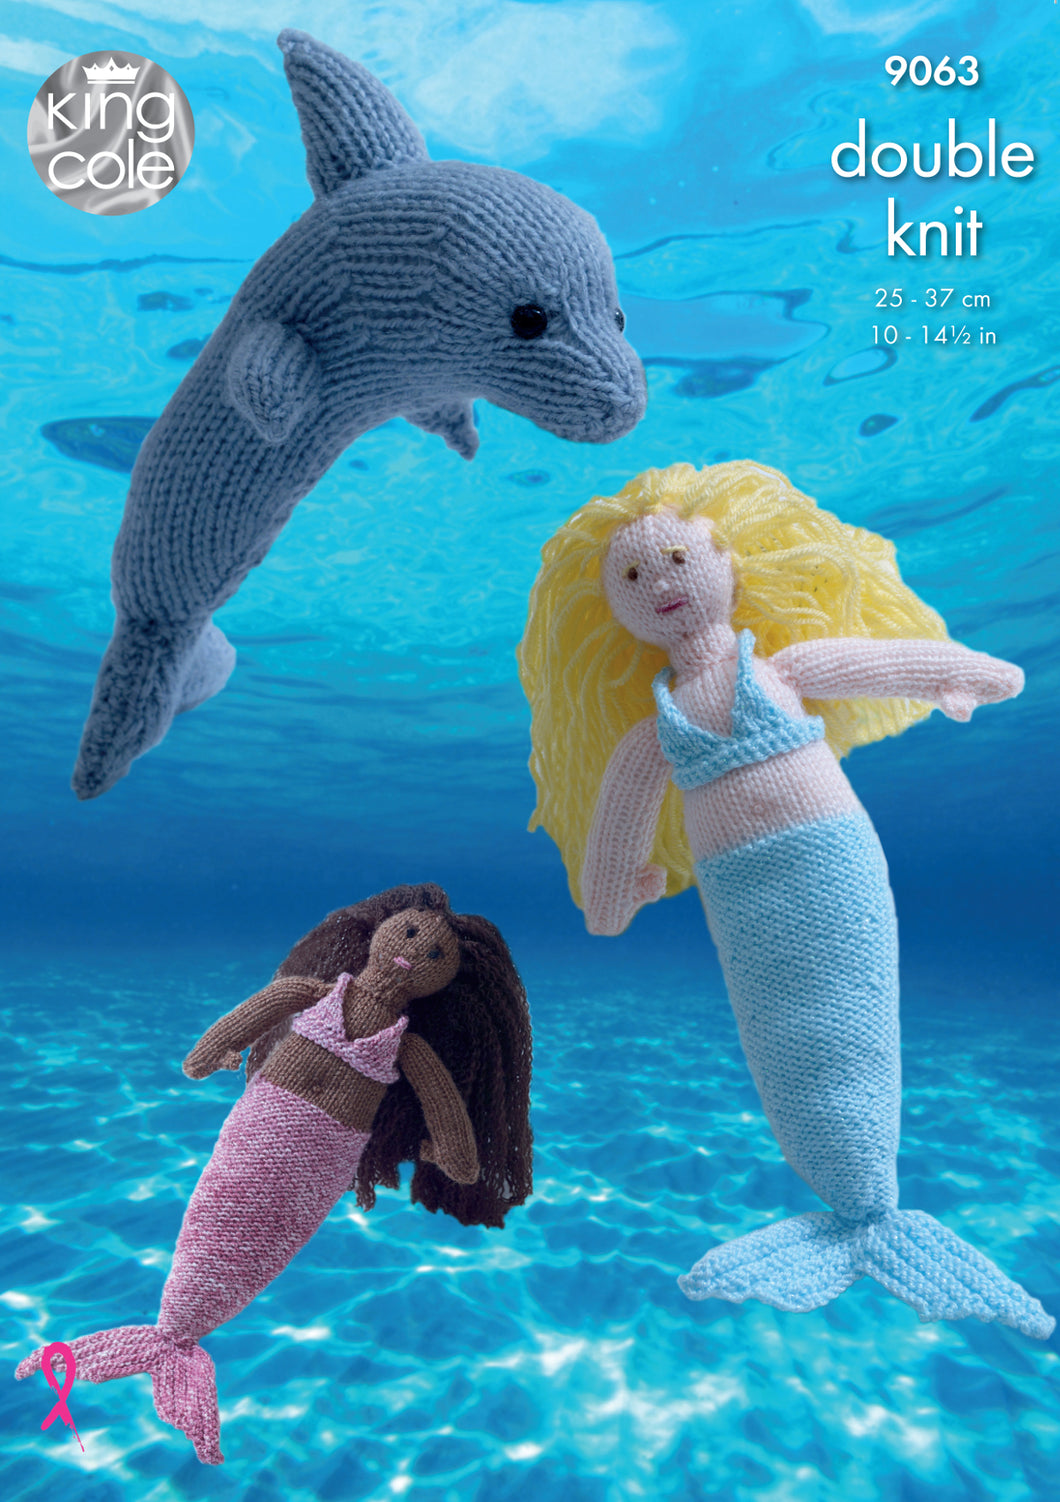 King Cole Double Knitting Pattern - Mermaid & Dolphin Toys (9063)